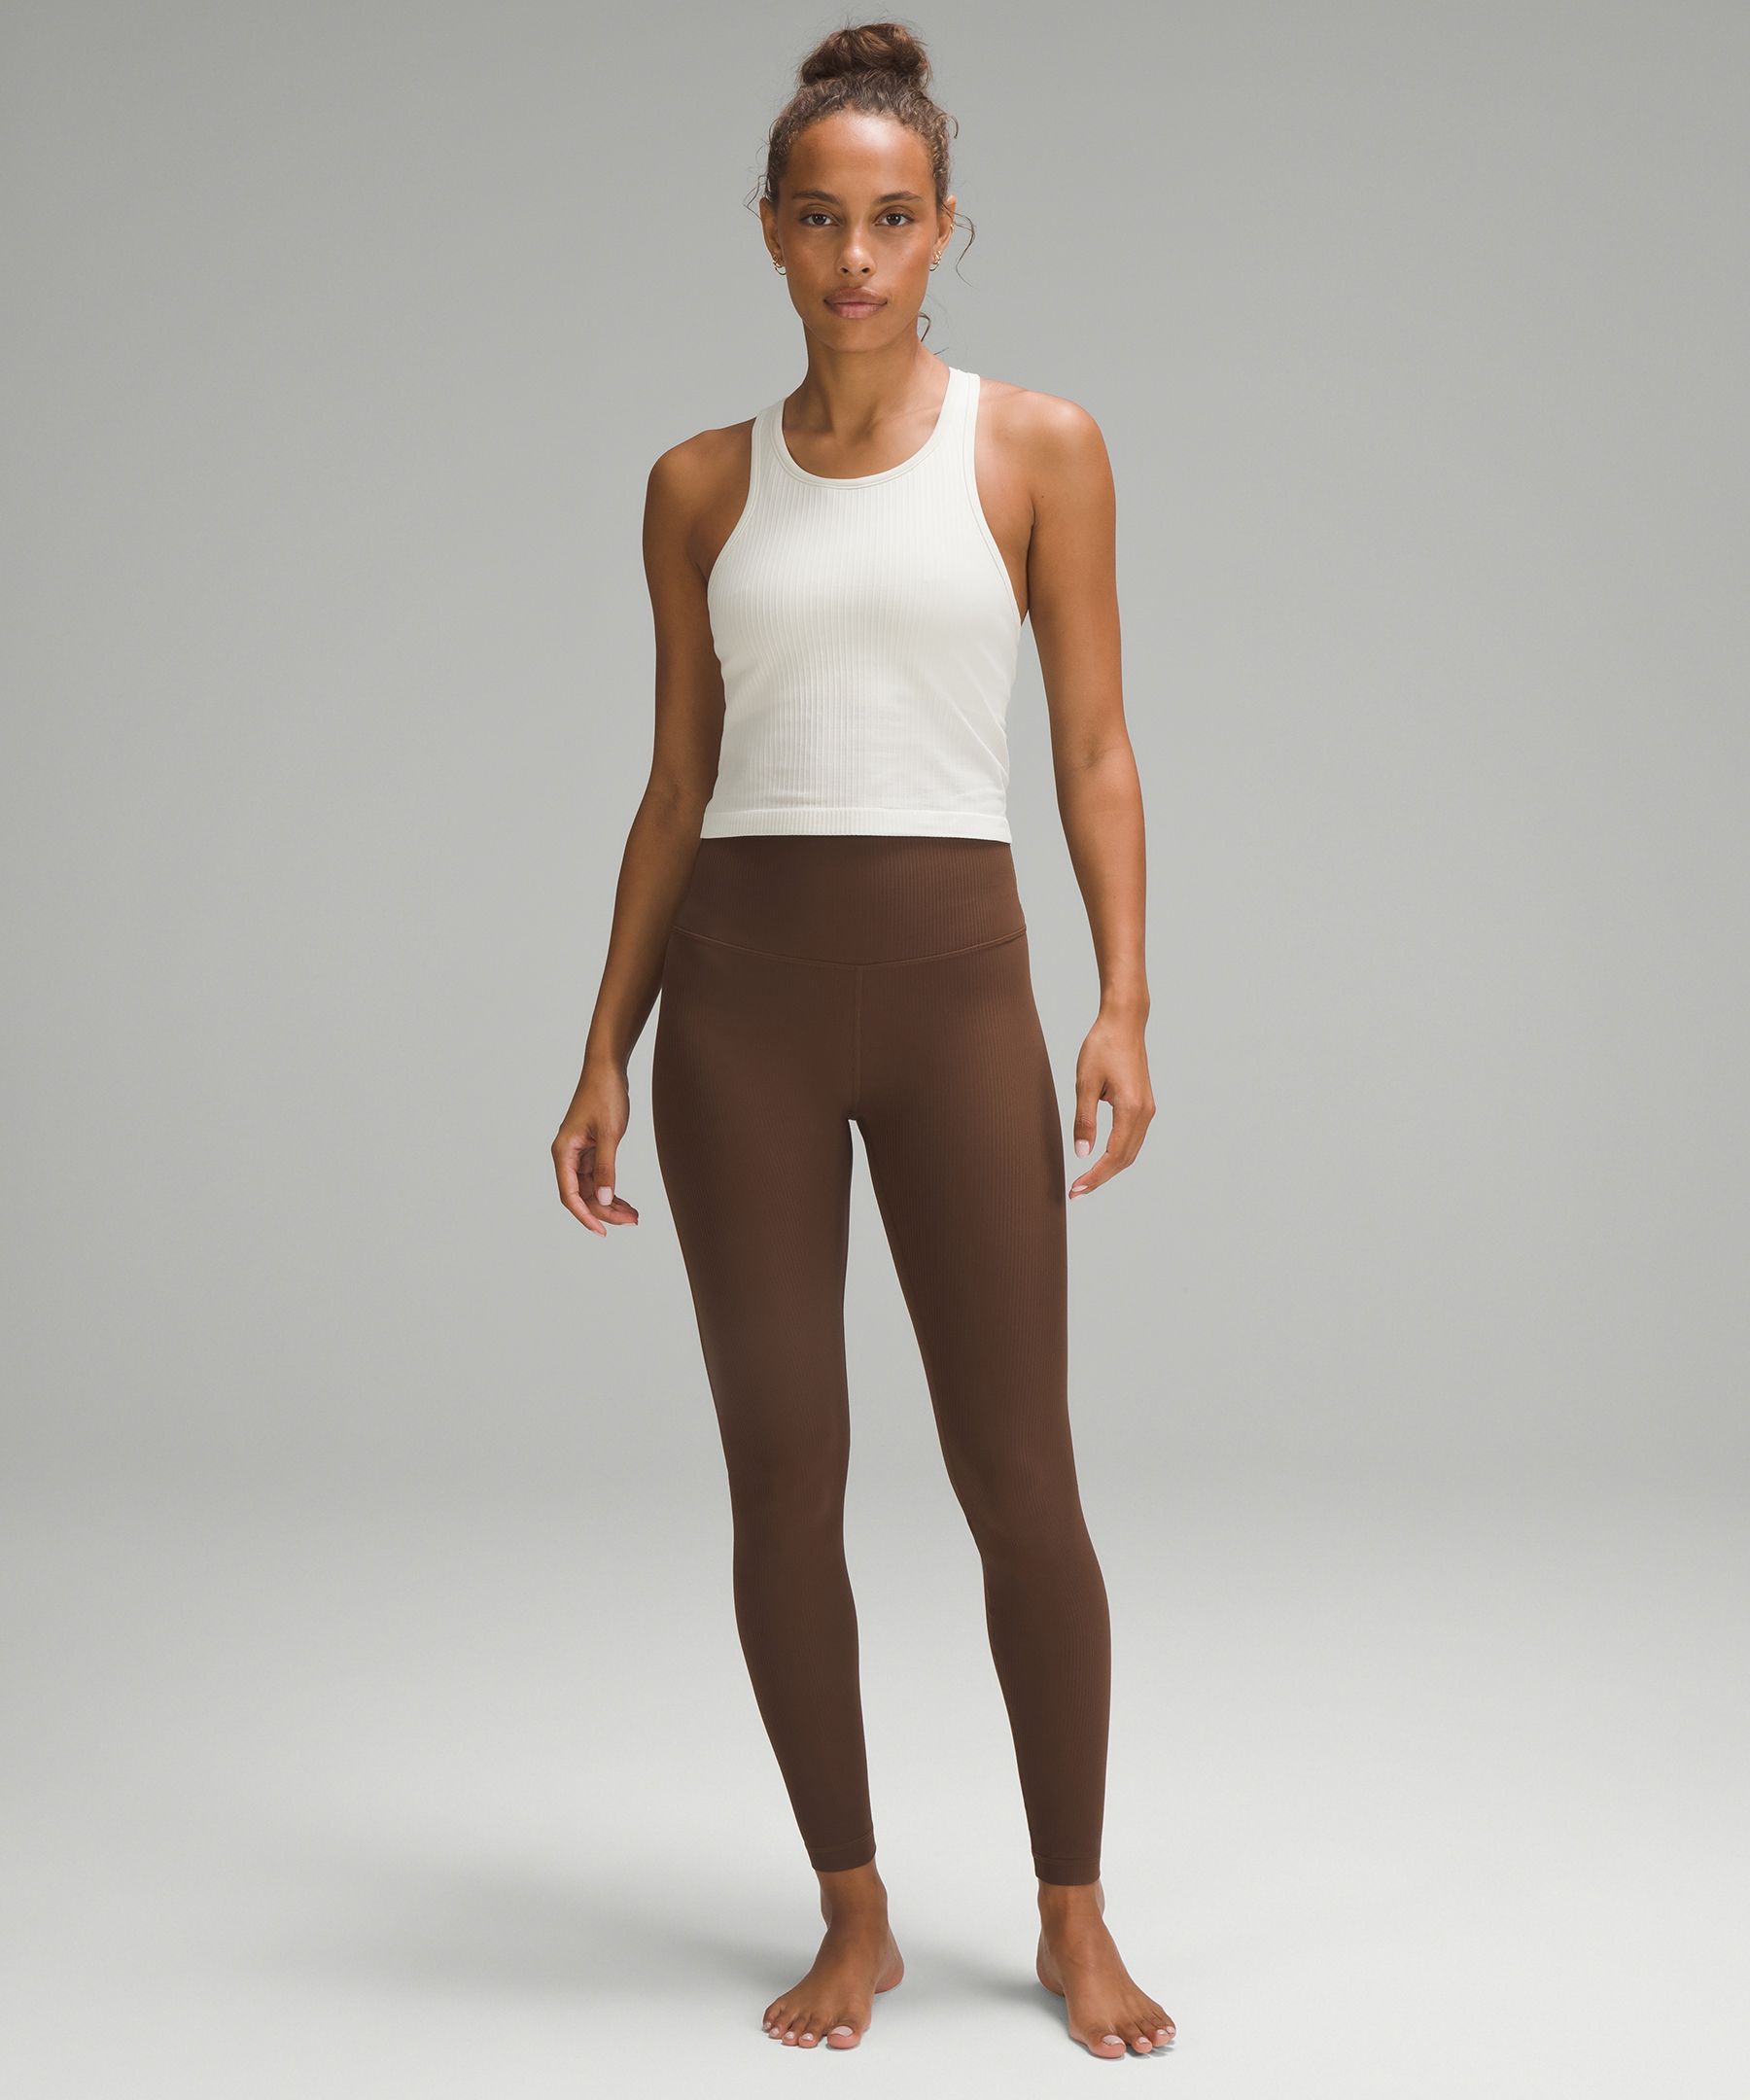 Lululemon Ribbed White Leggings Size 6 - $90 (34% Off Retail) - From Jessica